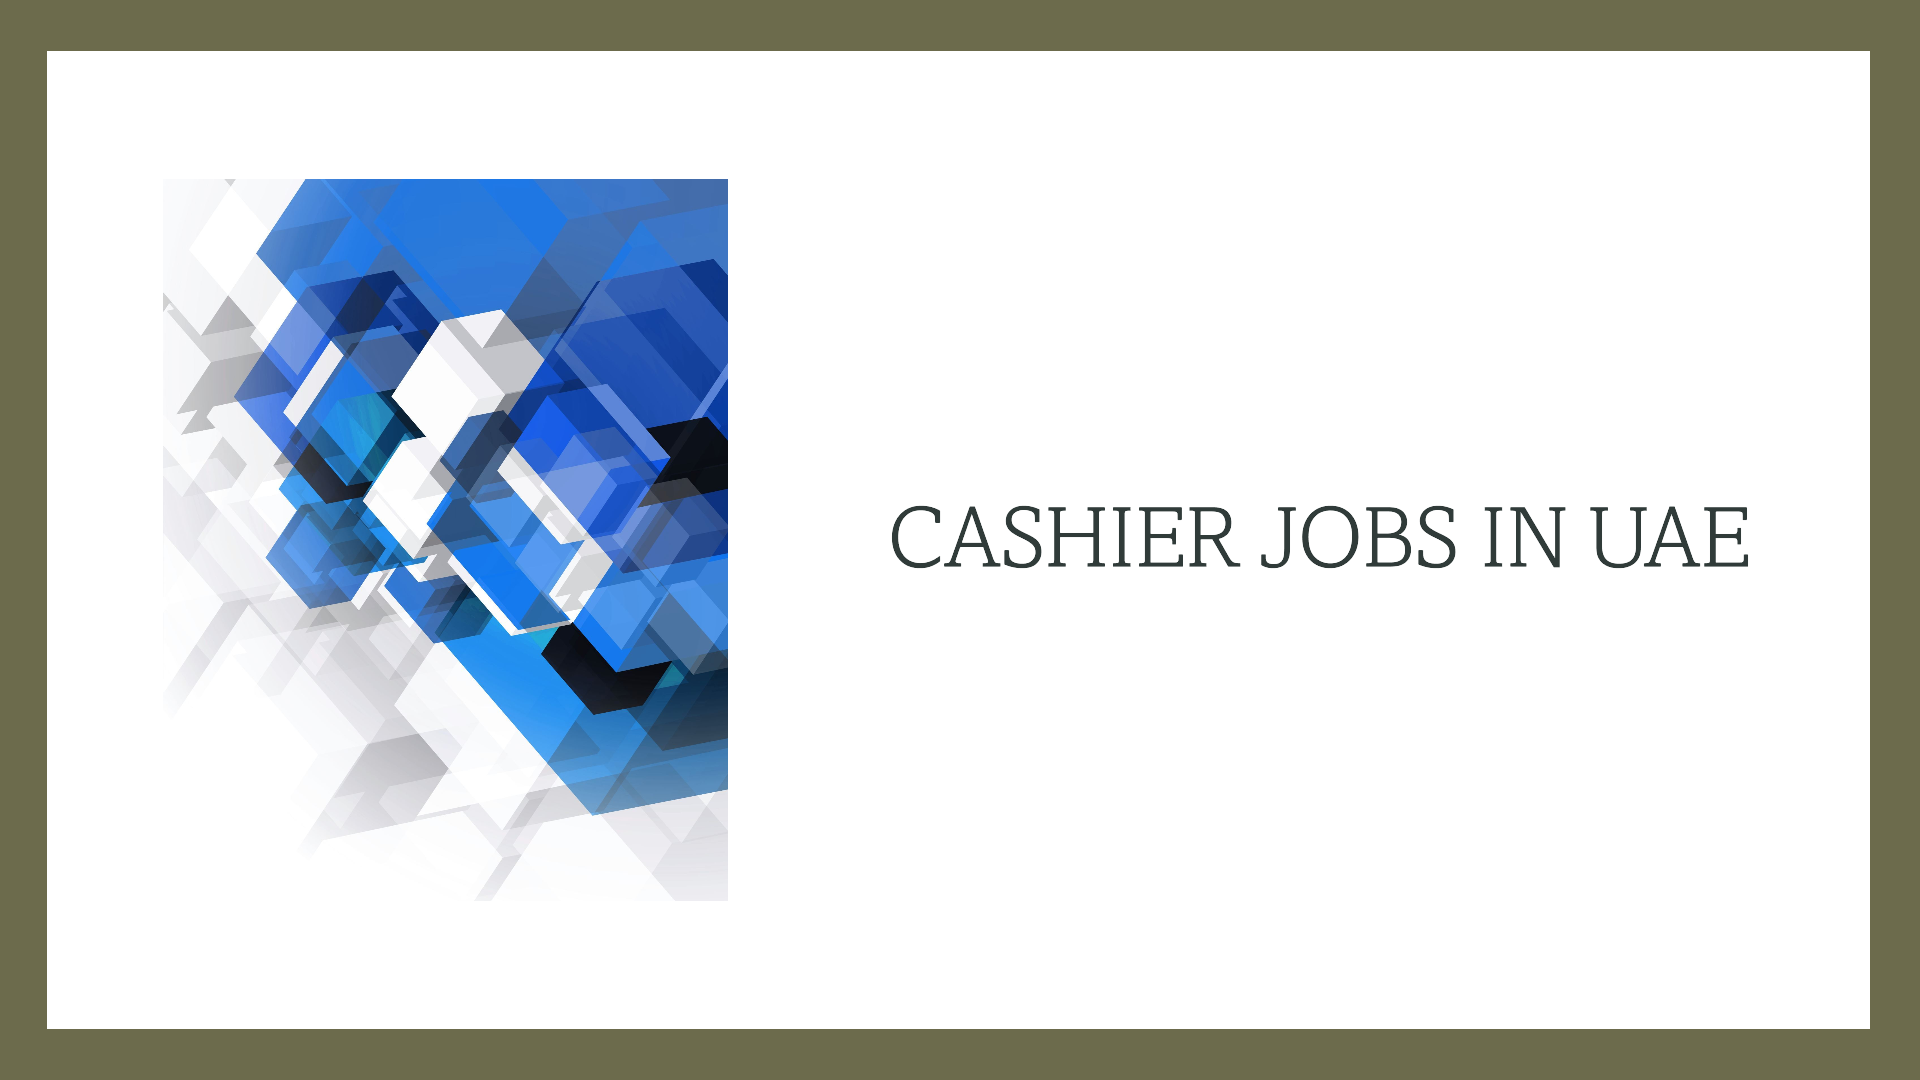 Cashier jobs in UAE for Arabic and English speakers